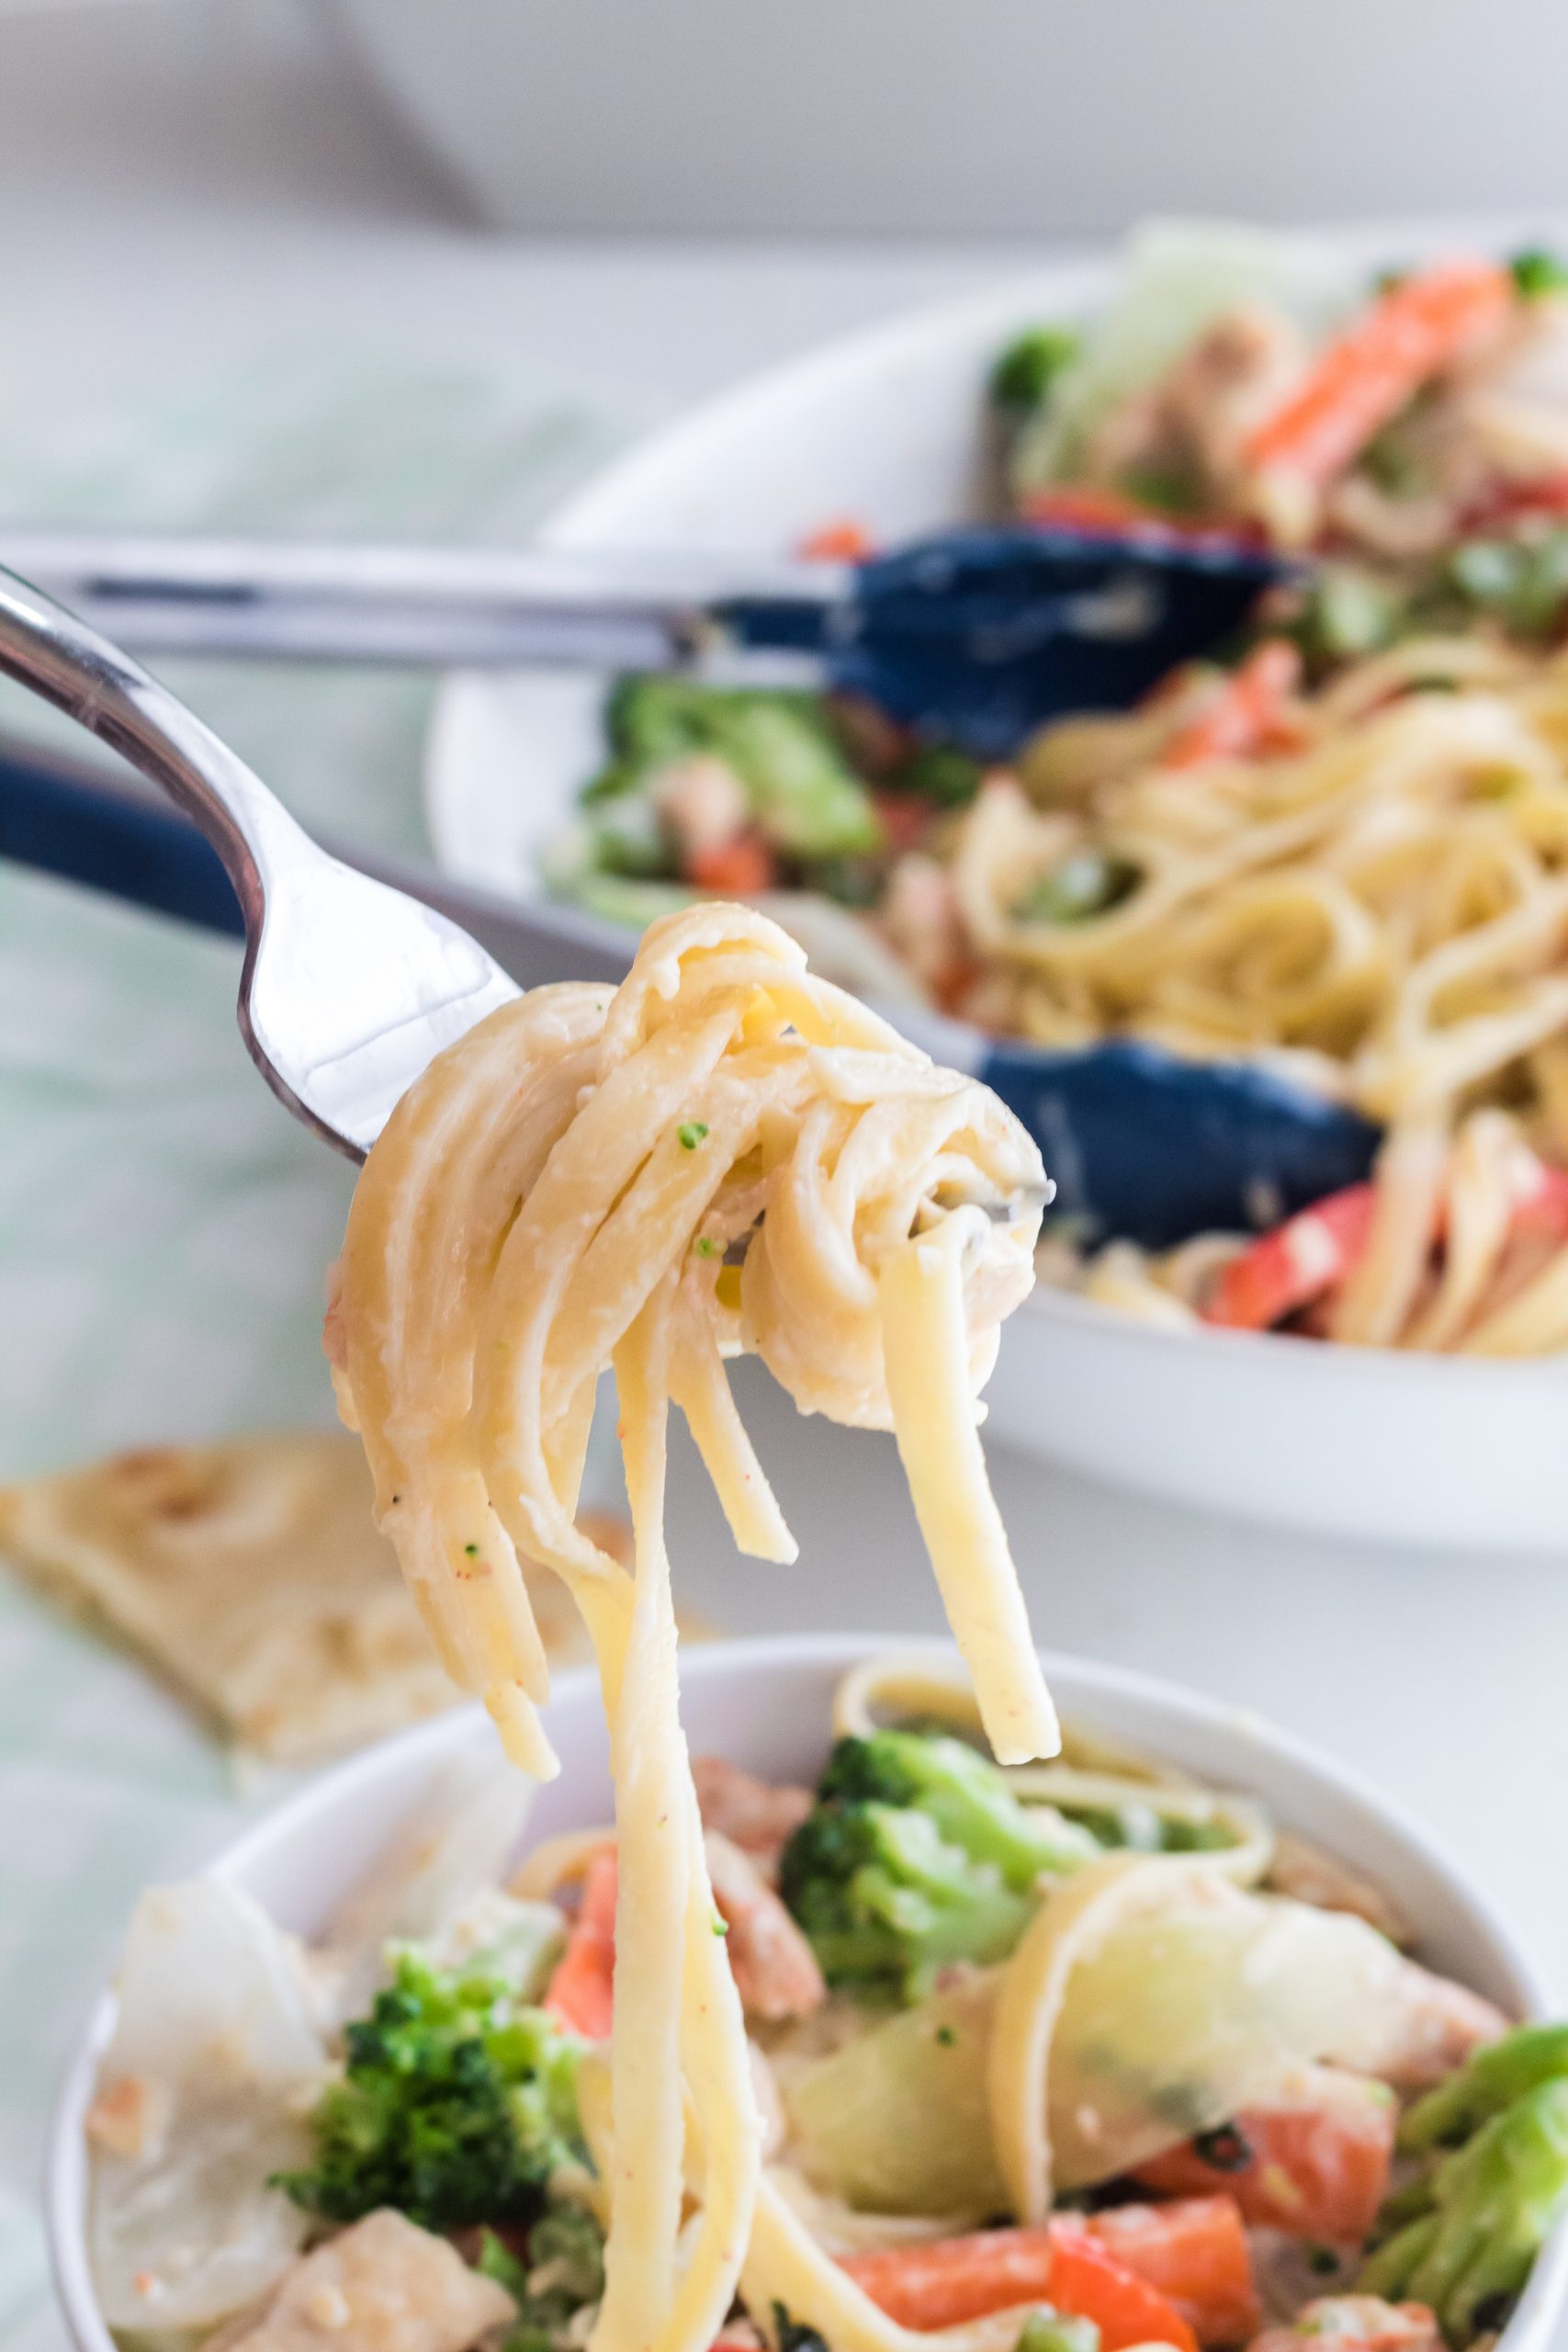 A fork full of fettuccine and a white bowl of fettccine with broccoli, carrots and red peppers